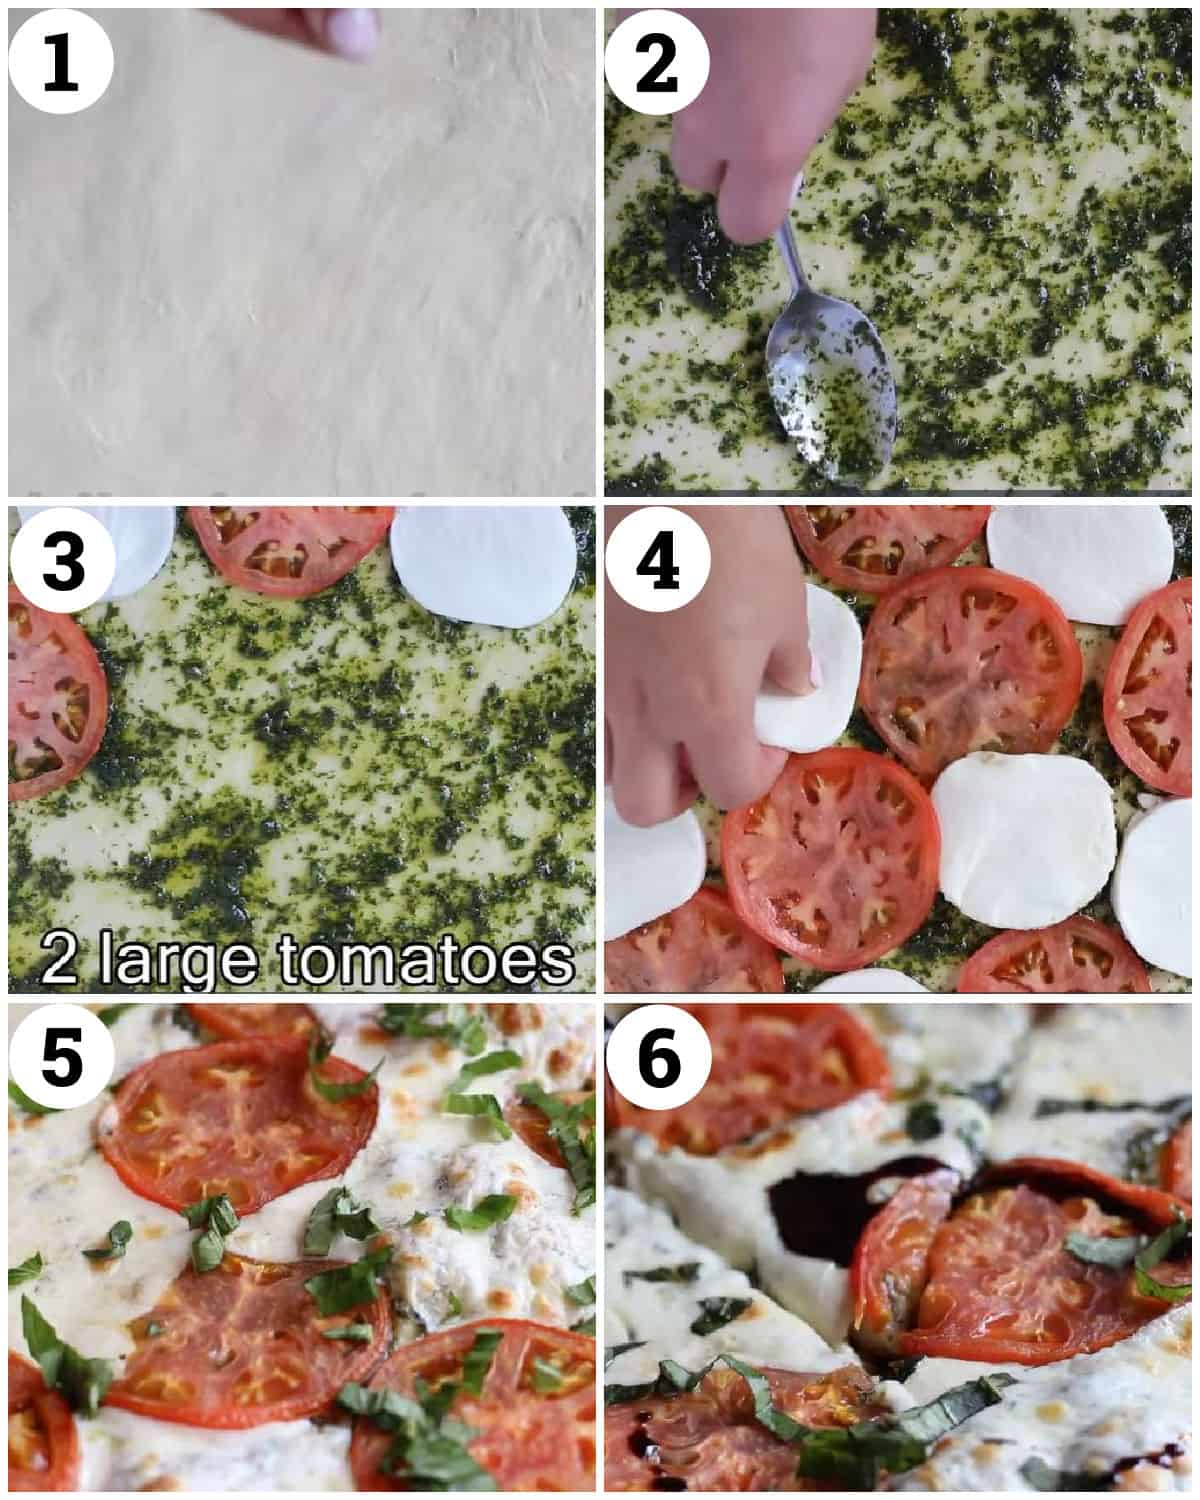 spread the pizza dough, brush with basil oil and top with tomatoes and mozzarella cheese. Bake in the oven until cheese is melted and dough is cooked. 